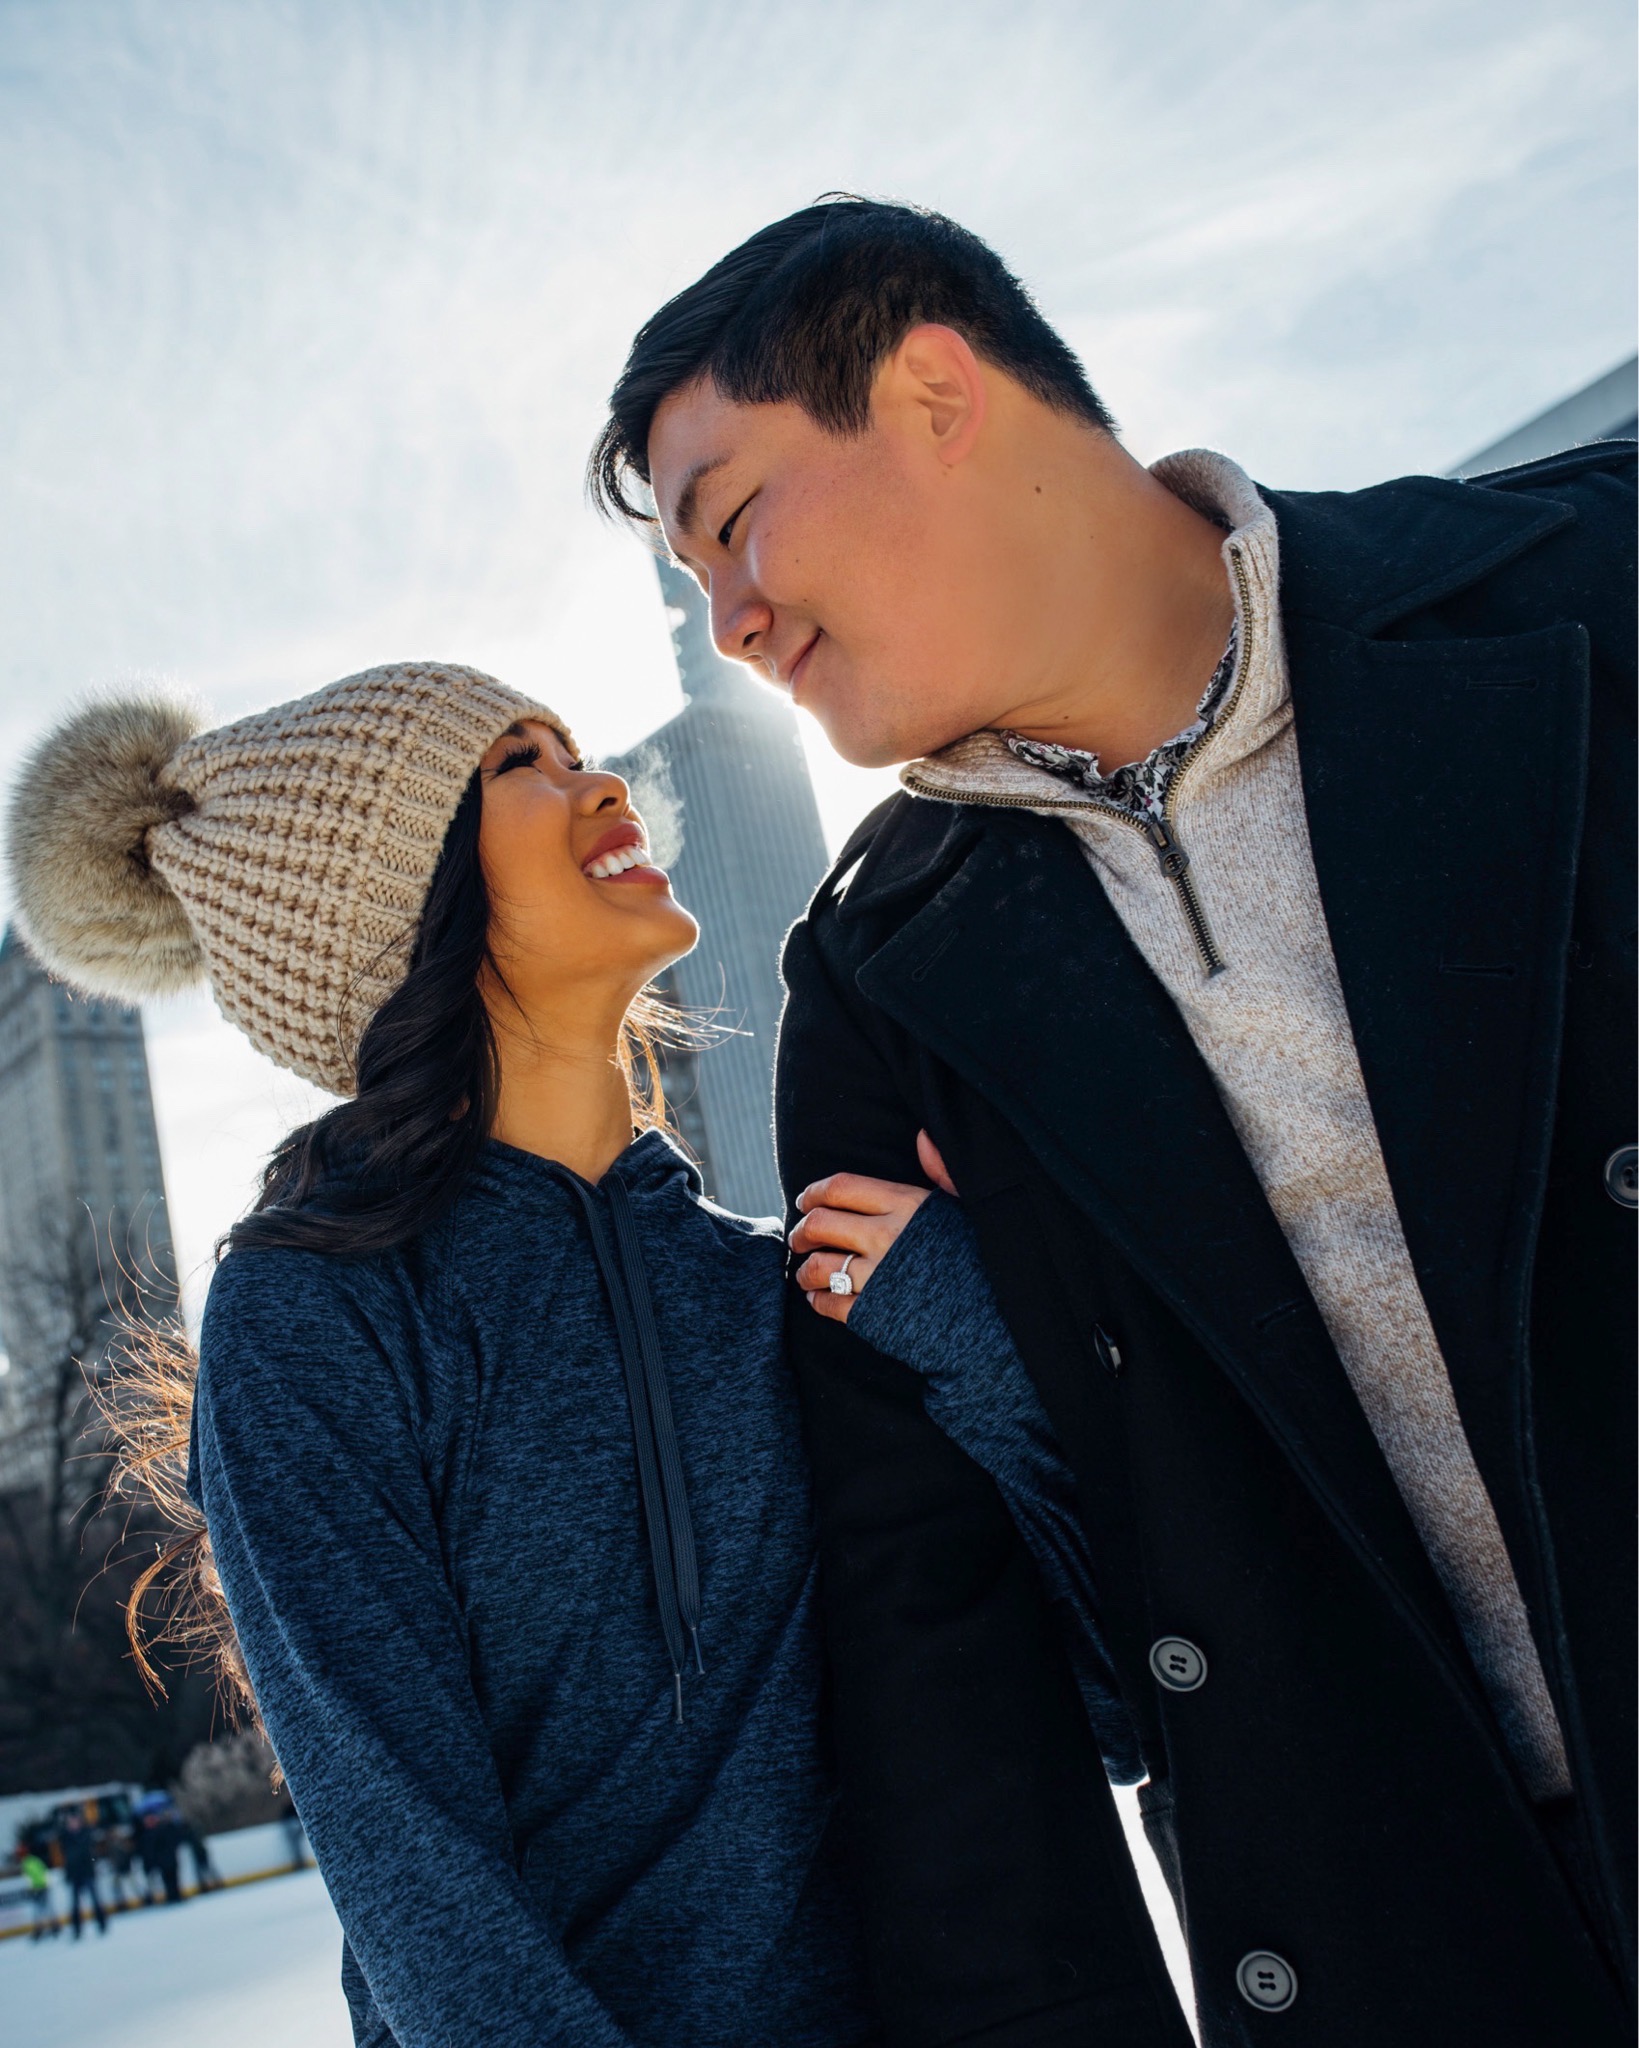 Surprise proposal ideas in Central Park while ice skating